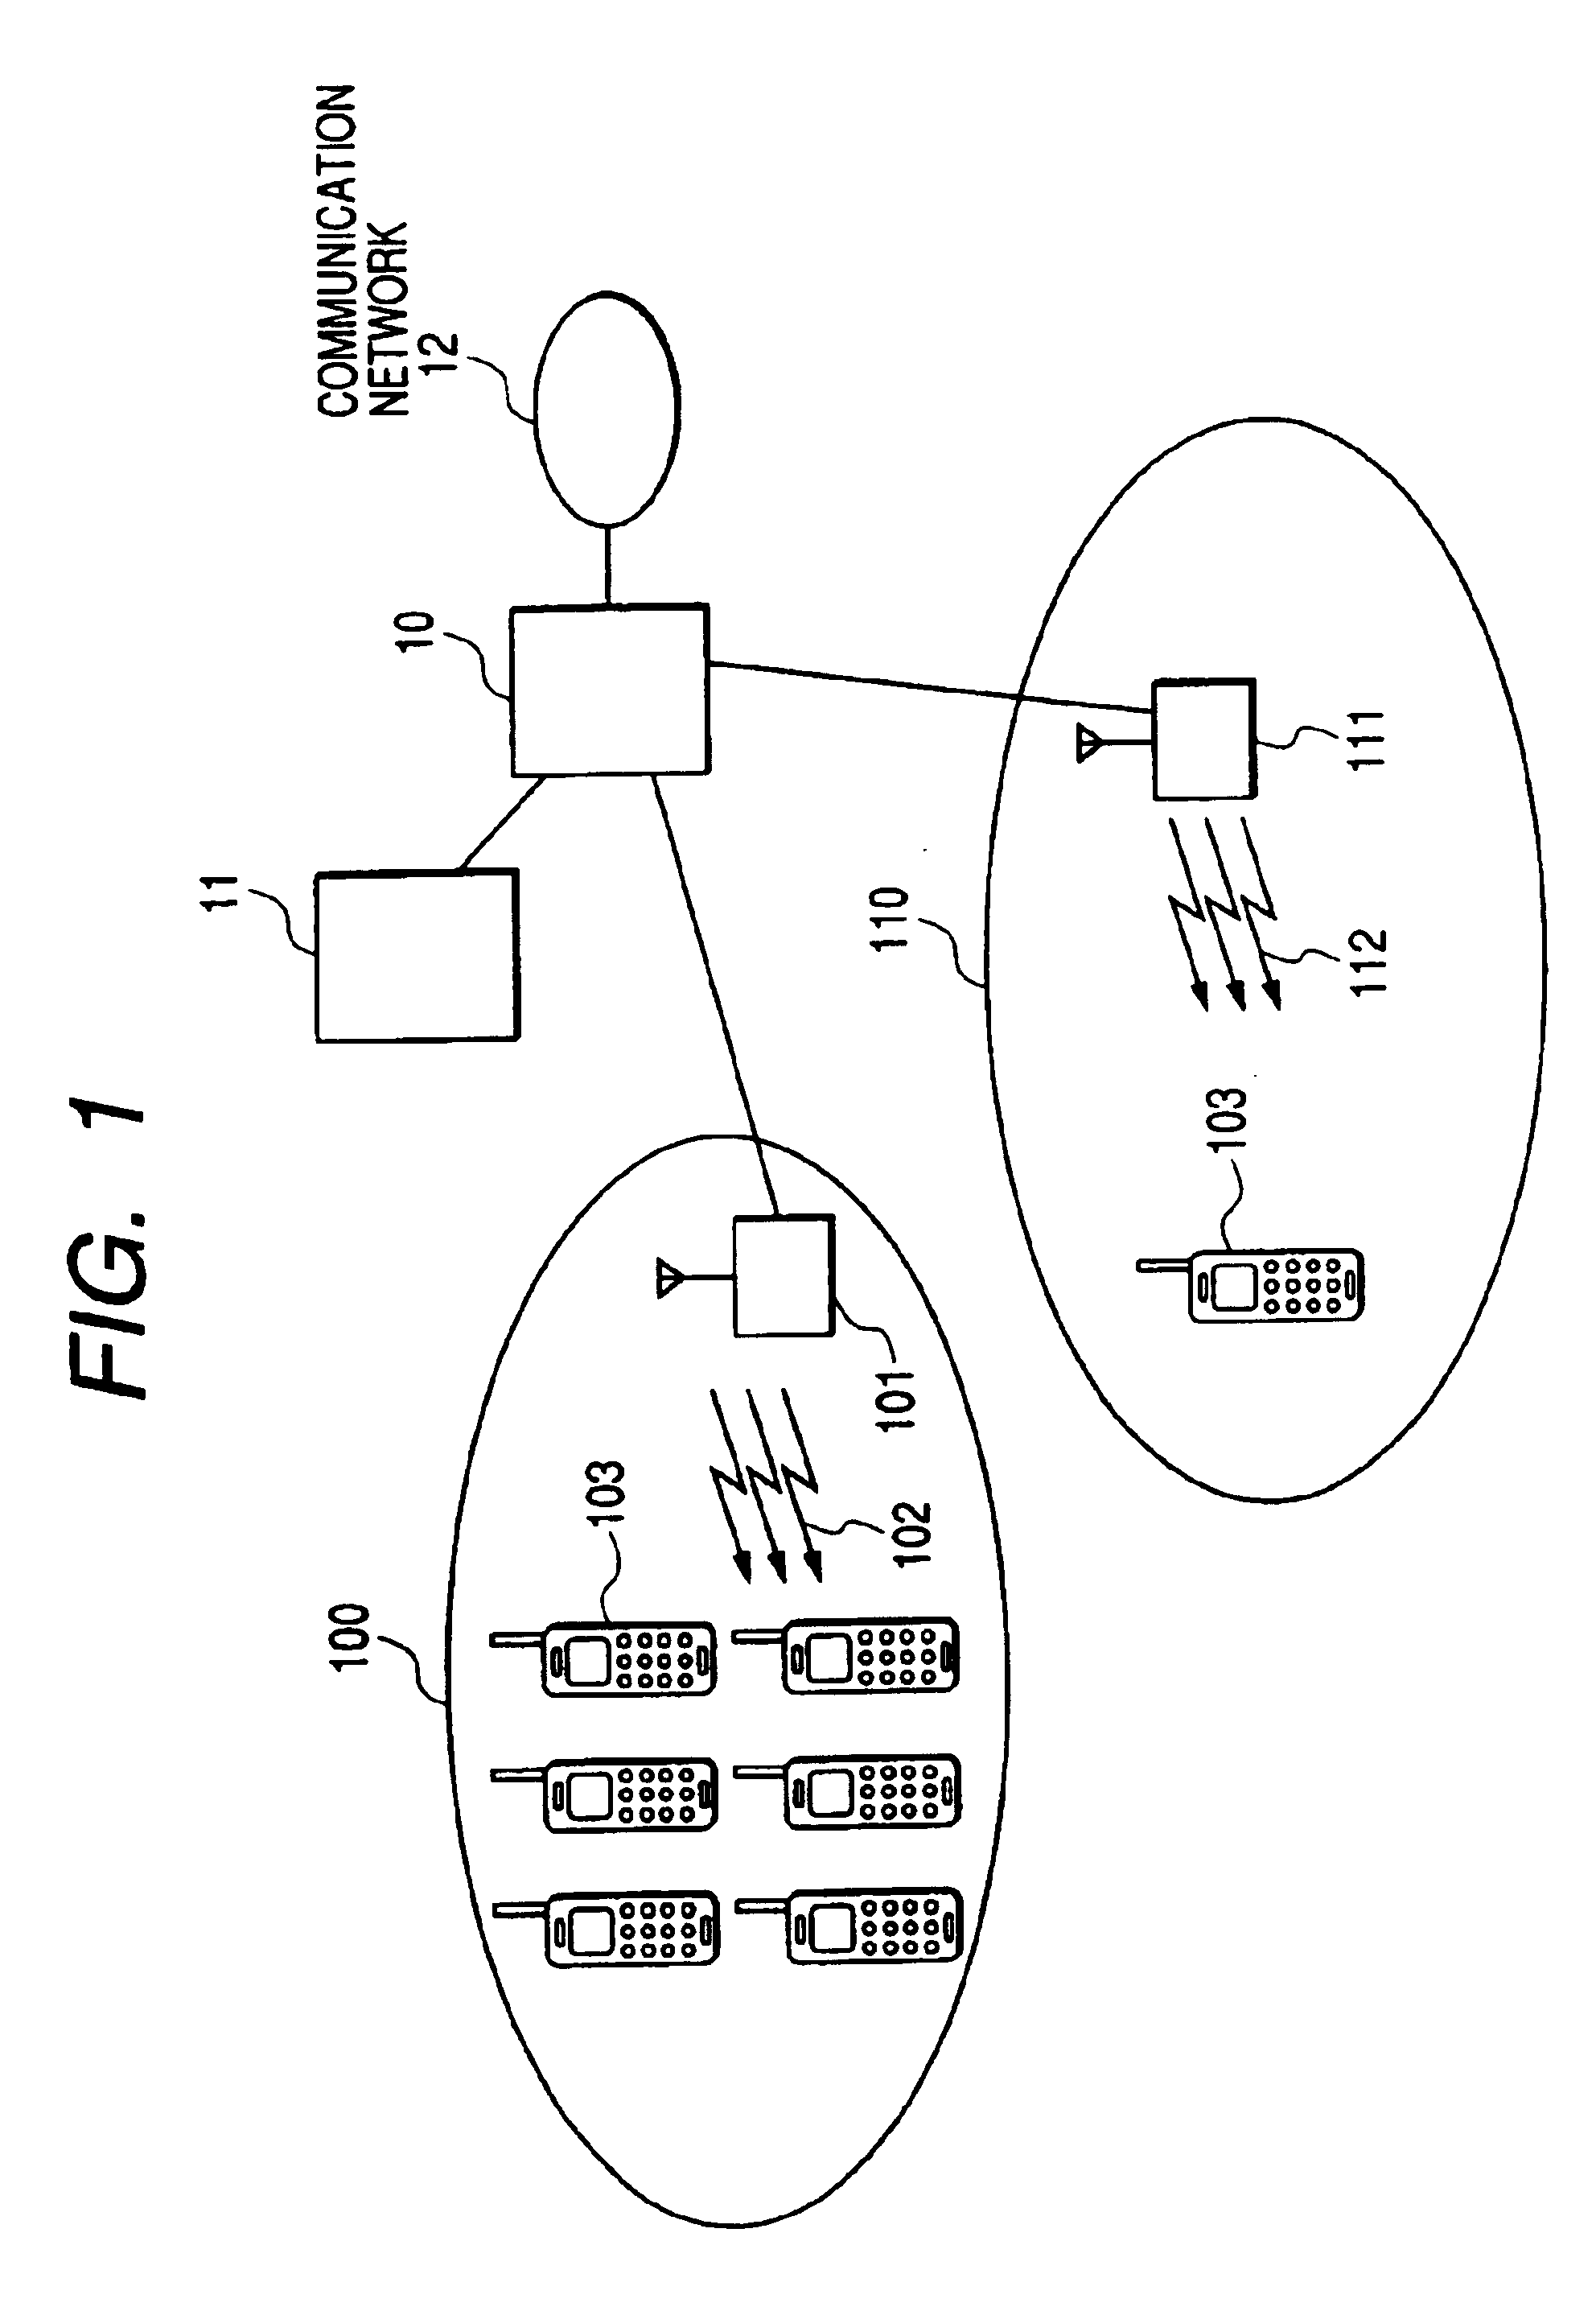 Wireless communication system capable of changing dynamically charge rate and wireless communication unit usable therewith